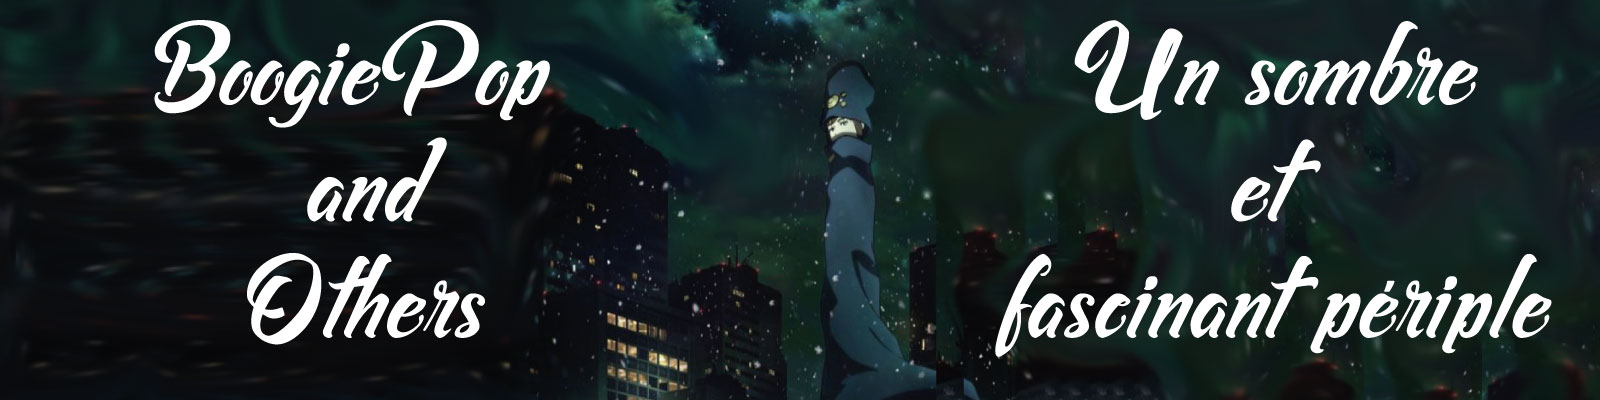 BoogiePoP-and-Others-hiver-2019